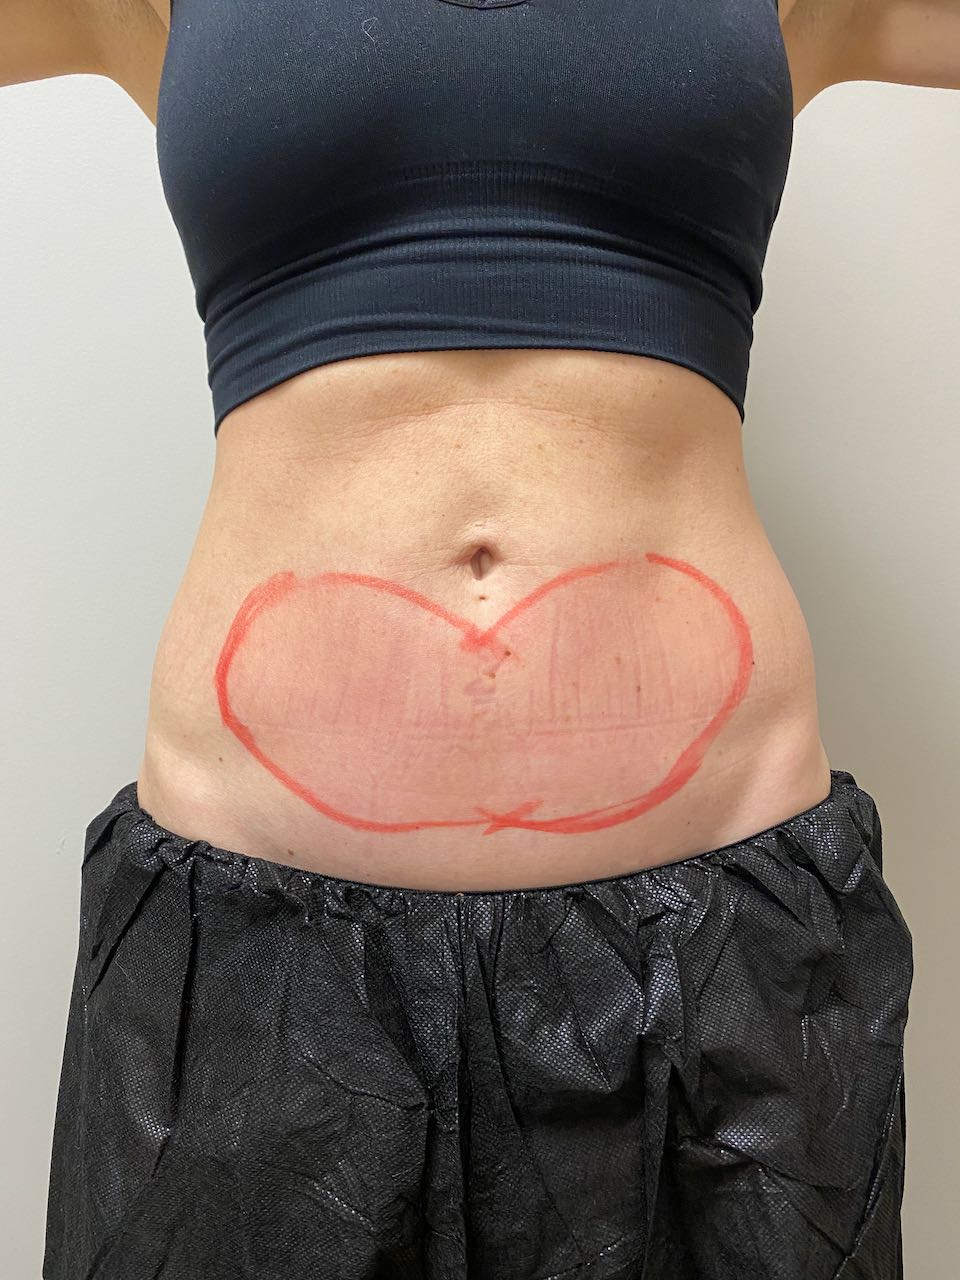 CoolSculpting Before and After Pictures - Female Stomach